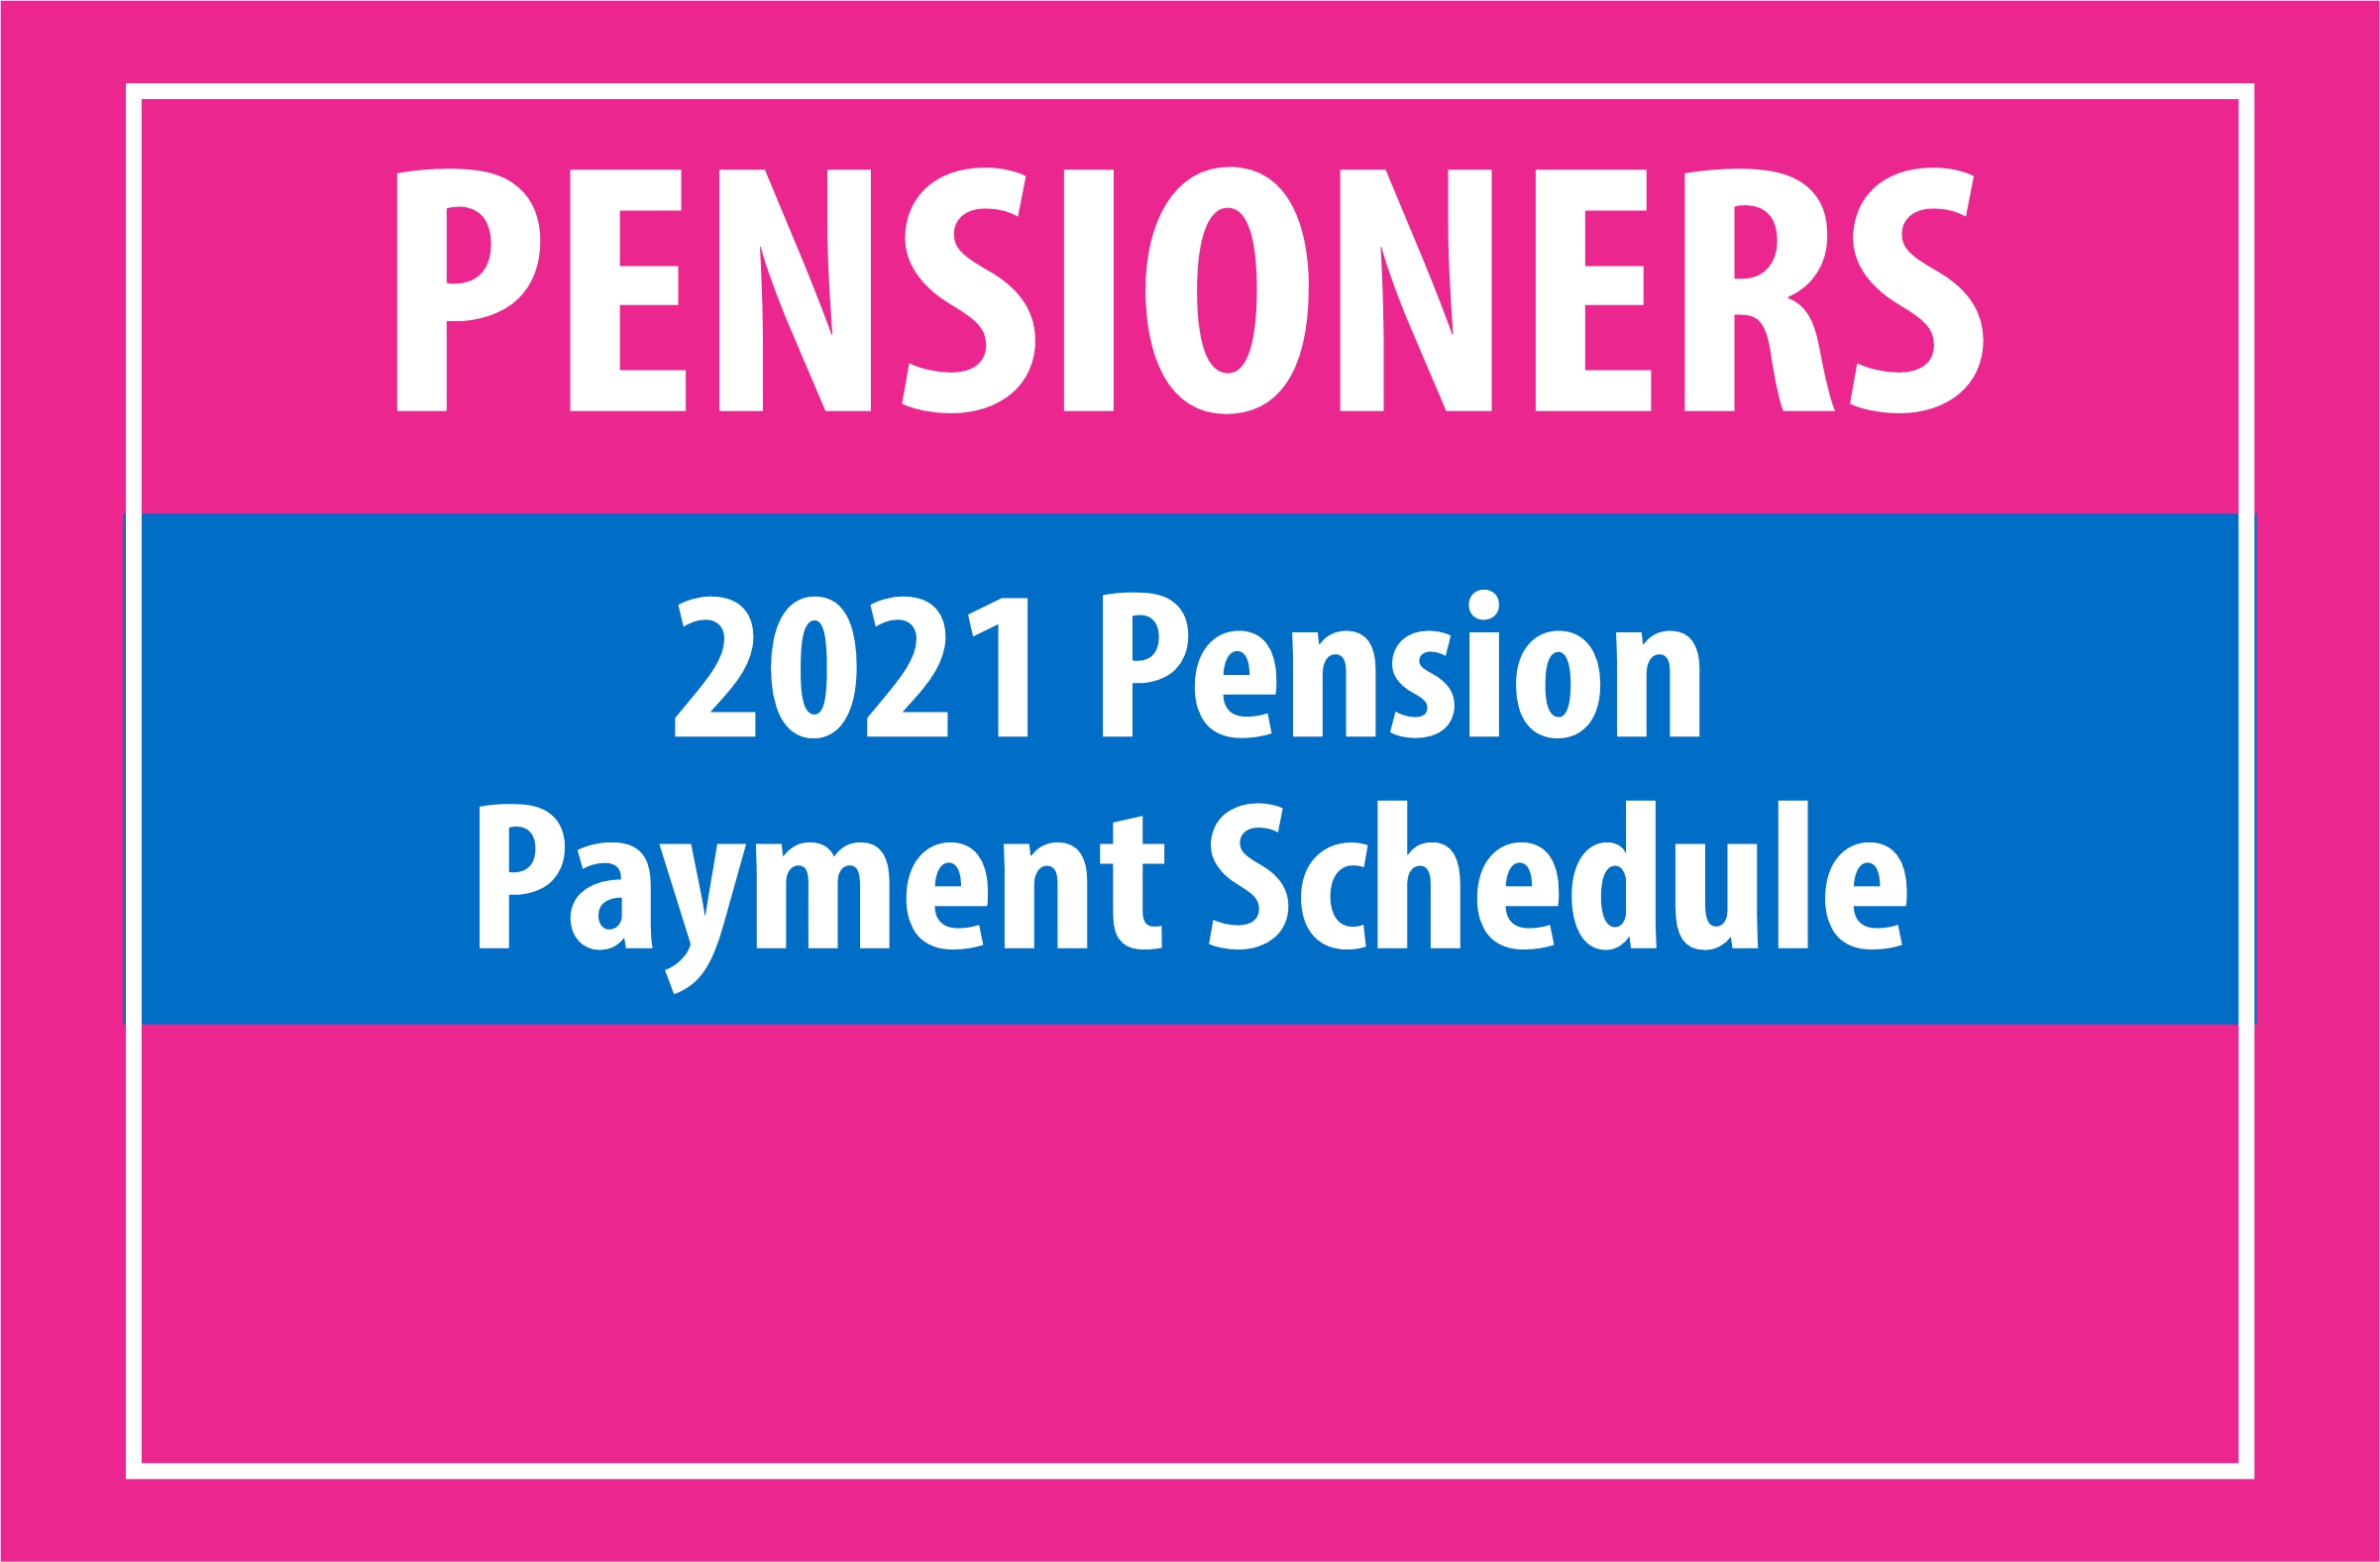 Updated: 2021 Pension Payment schedule